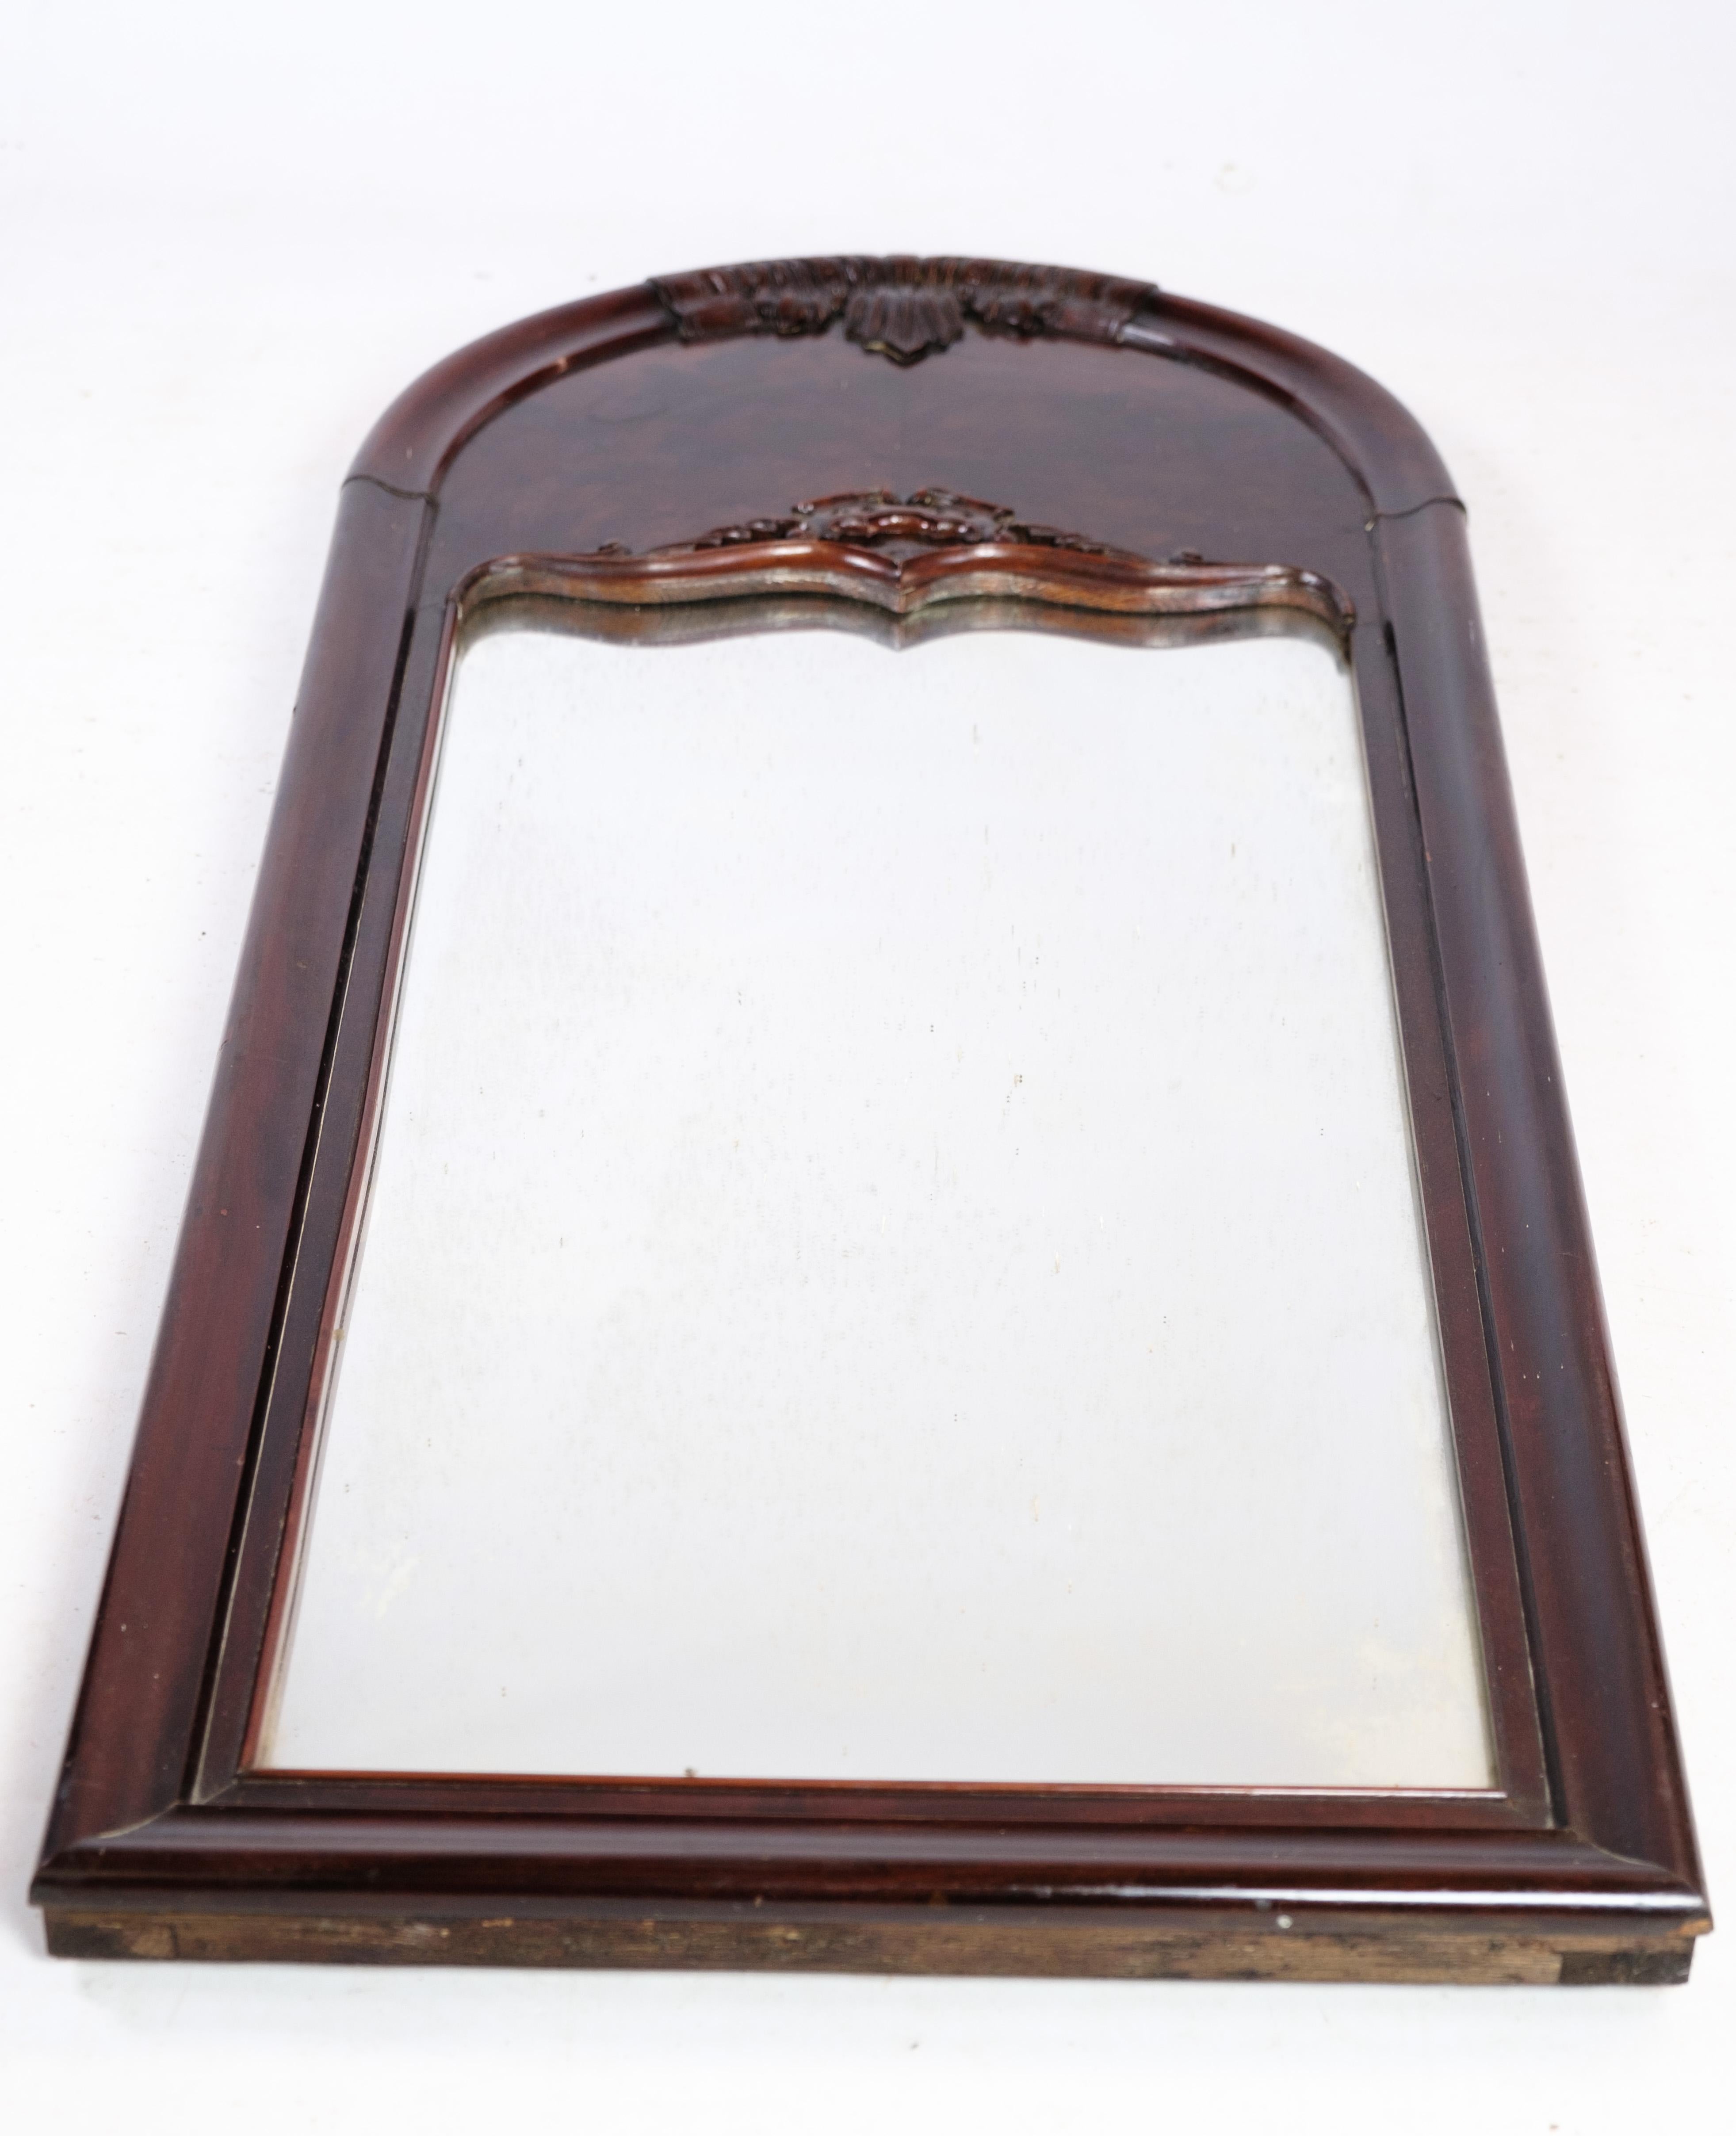 Mirror of hand-polished mahogany, with carvings, made in Denmark from around the 1880s.
Dimensions in cm: H:118 W:53

This product will be inspected thoroughly at our professional workshop by our educated employees, who assure the product quality.